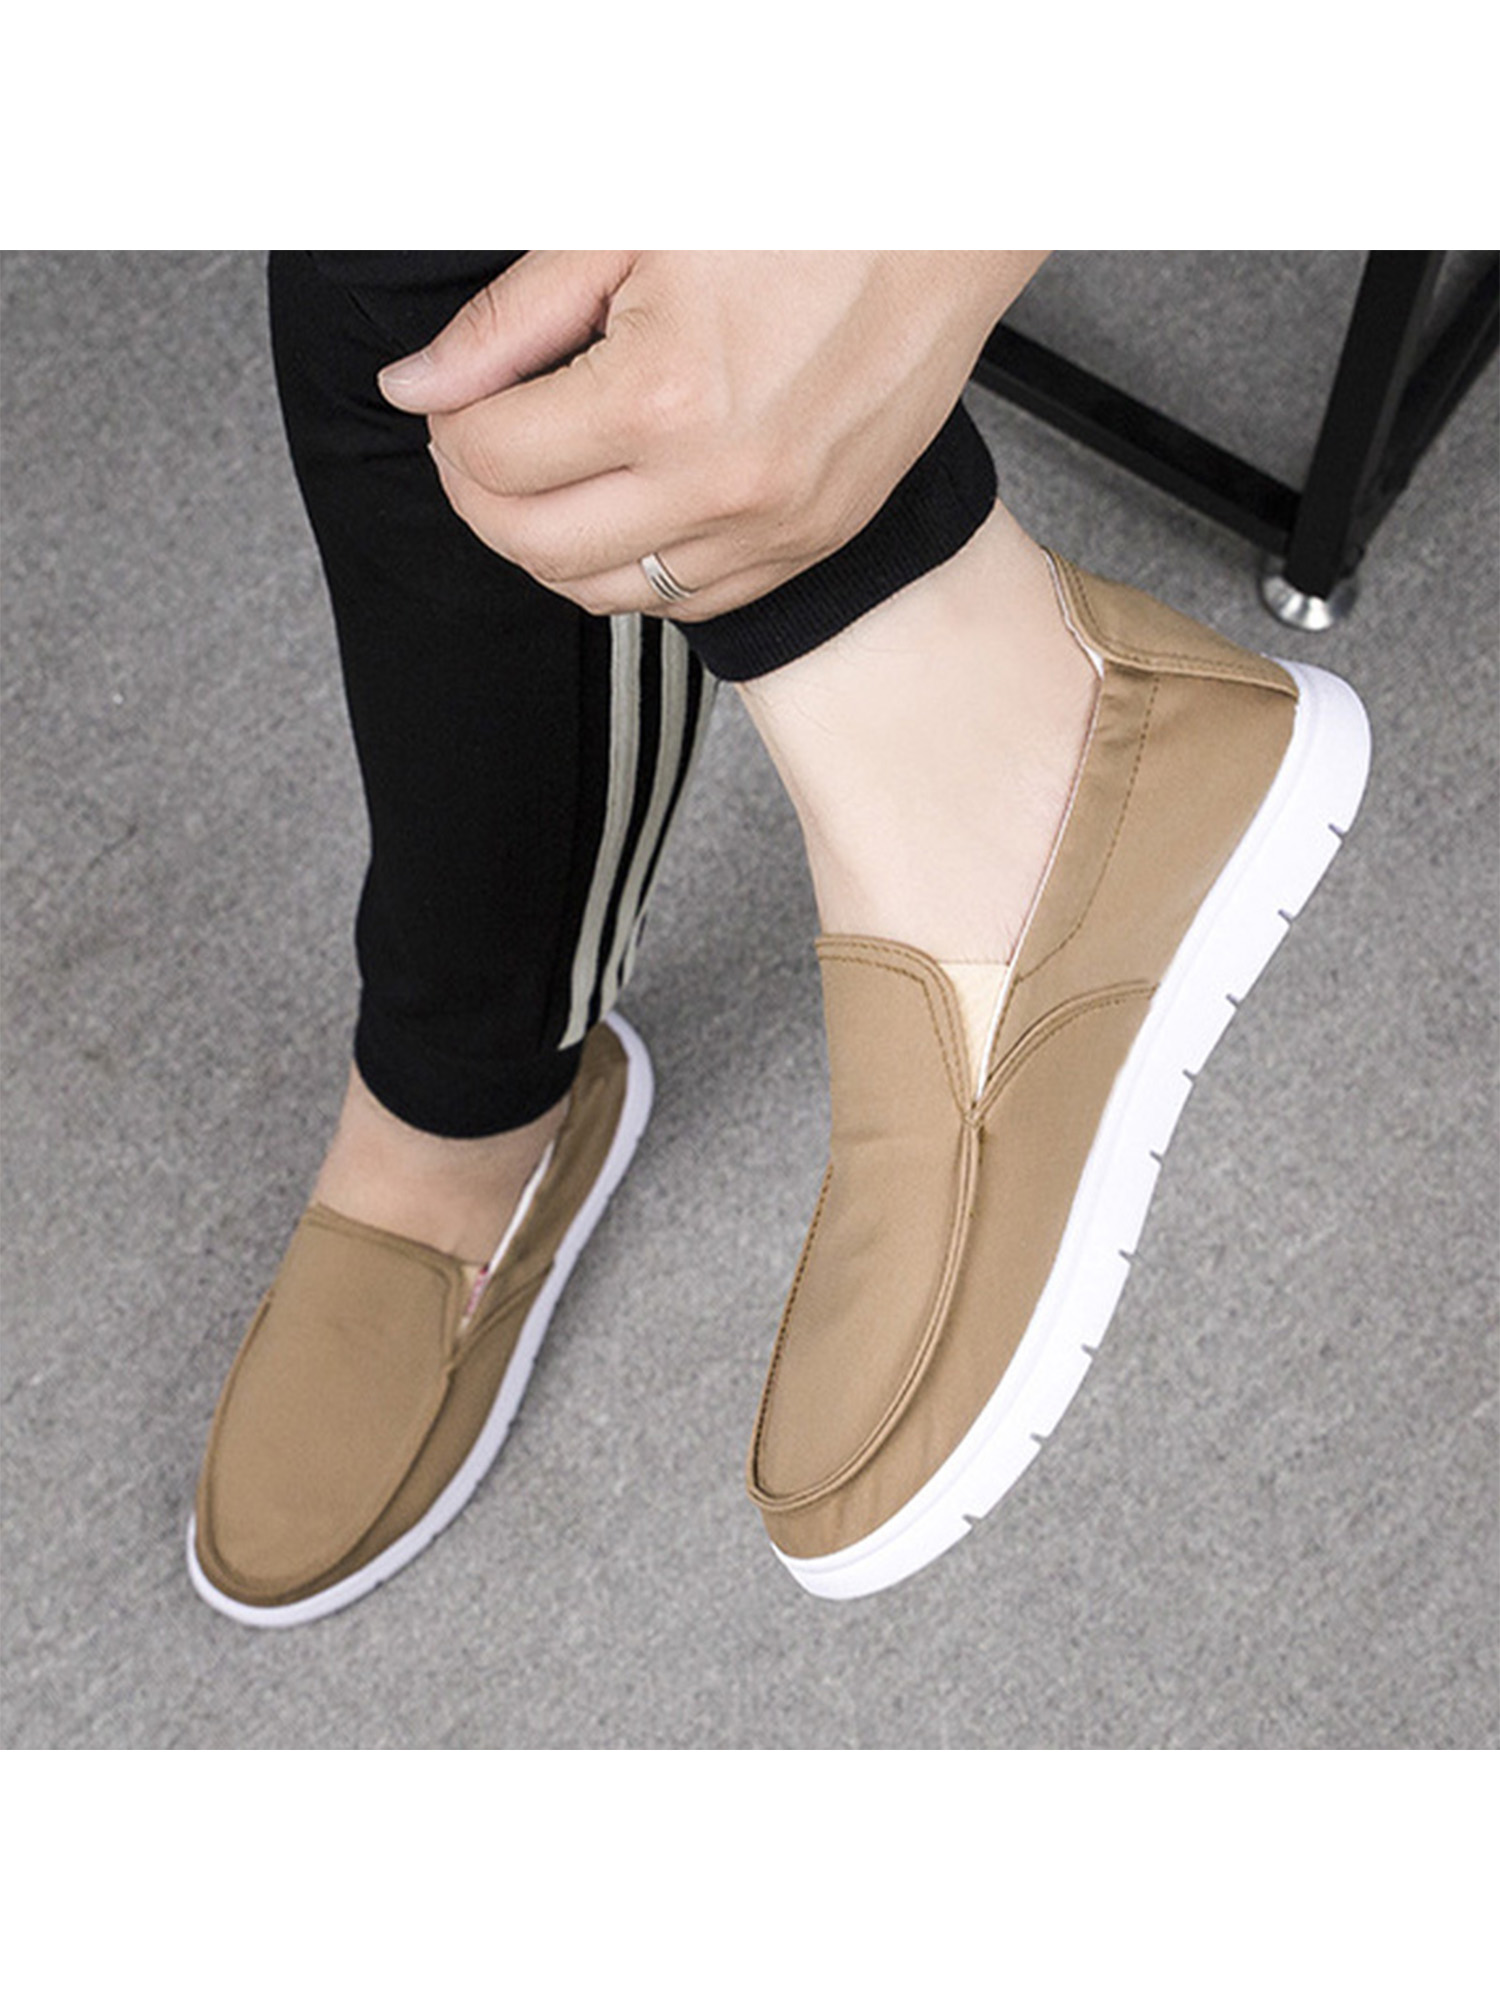 UKAP Casual Canvas Shoes for Men Slip On Loafers Deck Shoes Comfortable Boat Shoes Outdoor Fashion - image 5 of 8